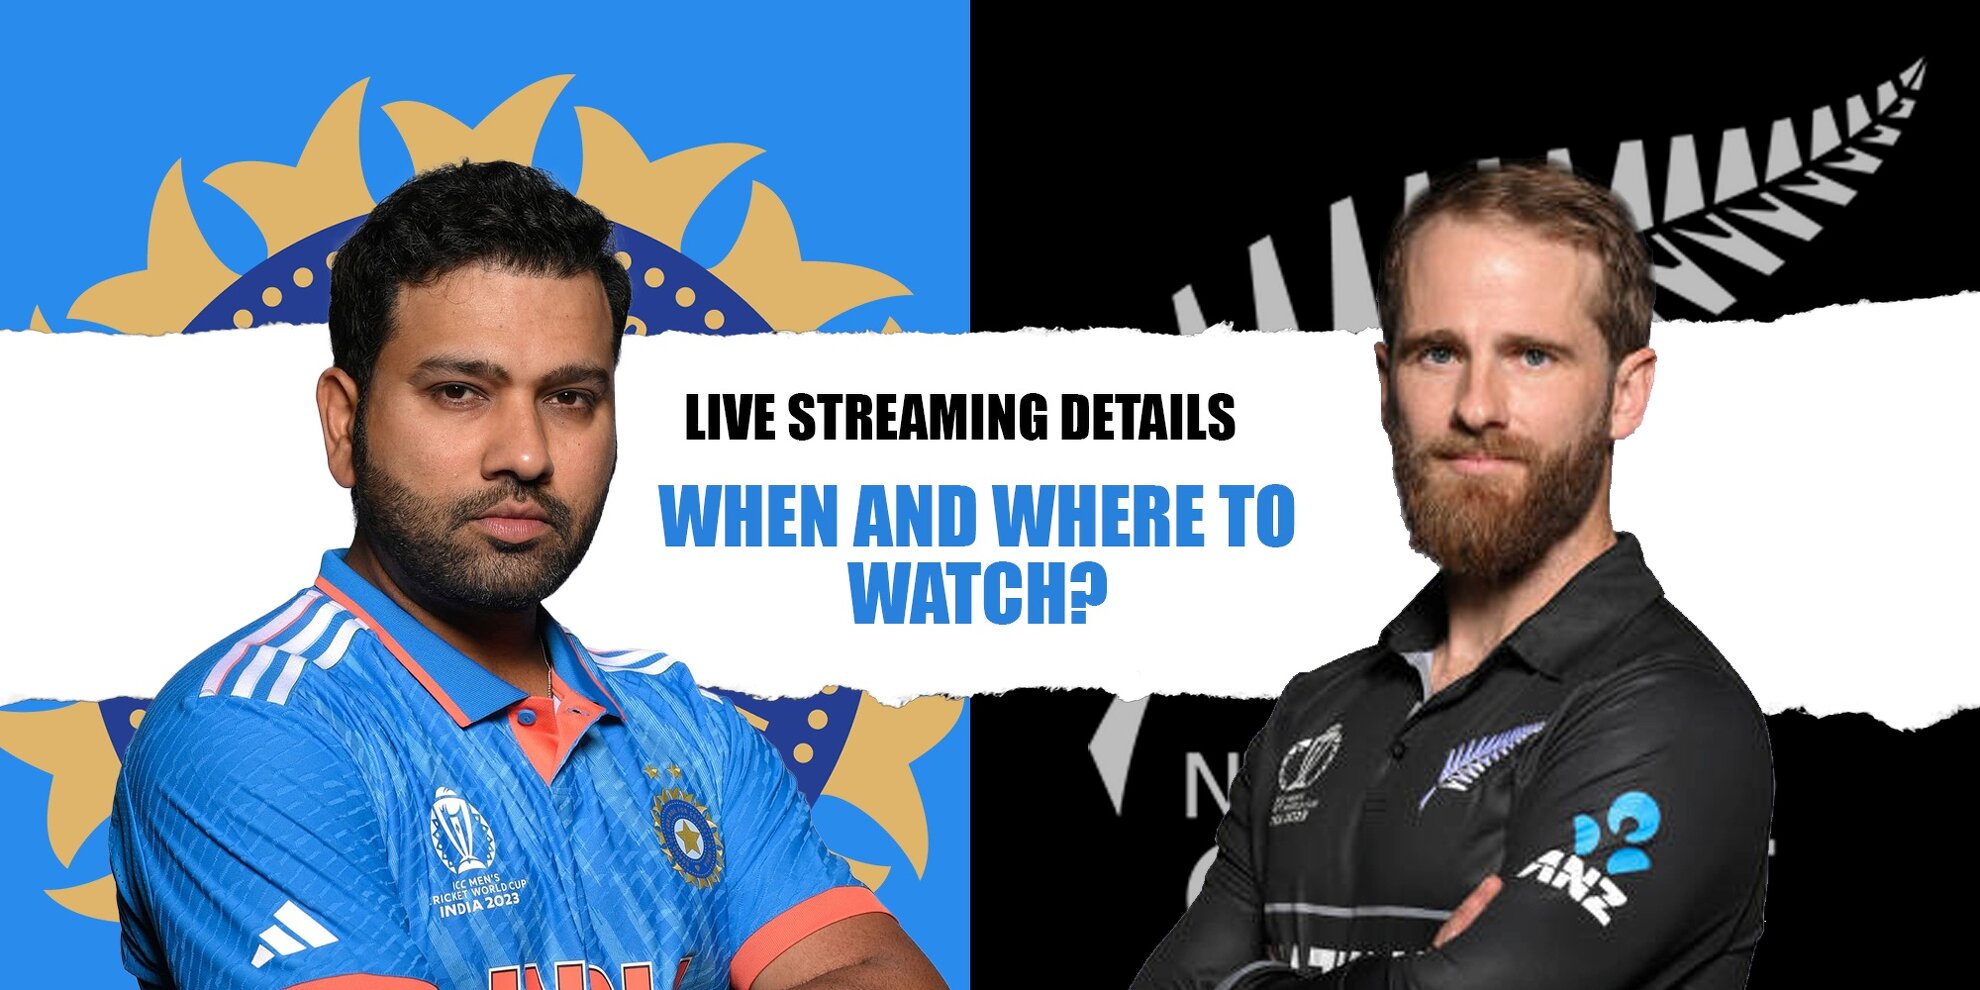 IND vs NZ Live streaming details, when and where to watch ICC Cricket